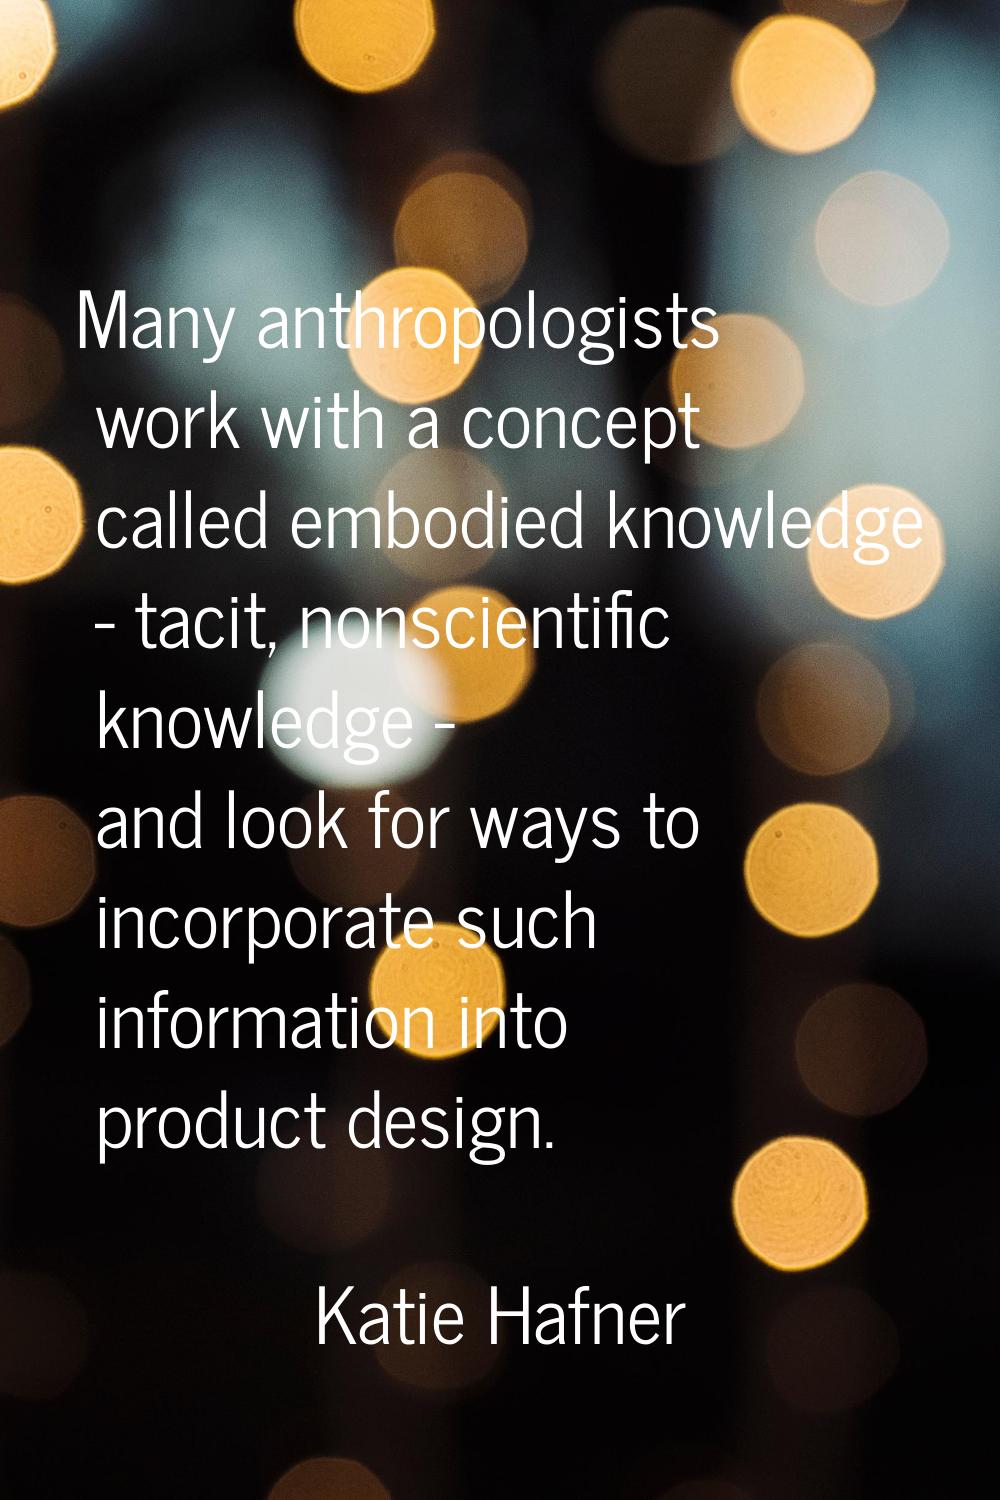 Many anthropologists work with a concept called embodied knowledge - tacit, nonscientific knowledge